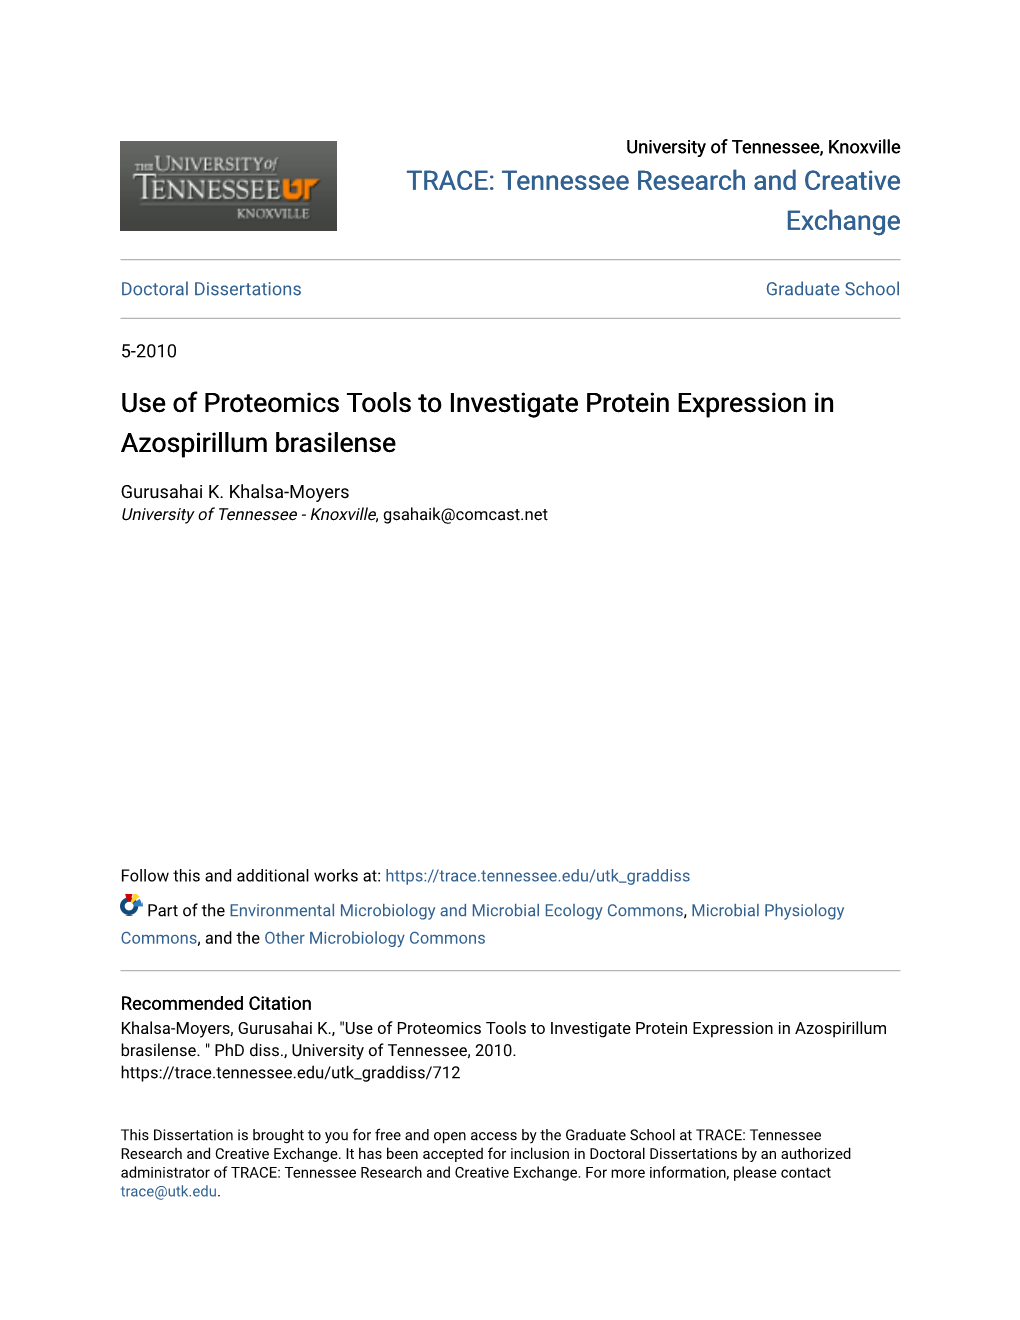 Use of Proteomics Tools to Investigate Protein Expression in Azospirillum Brasilense